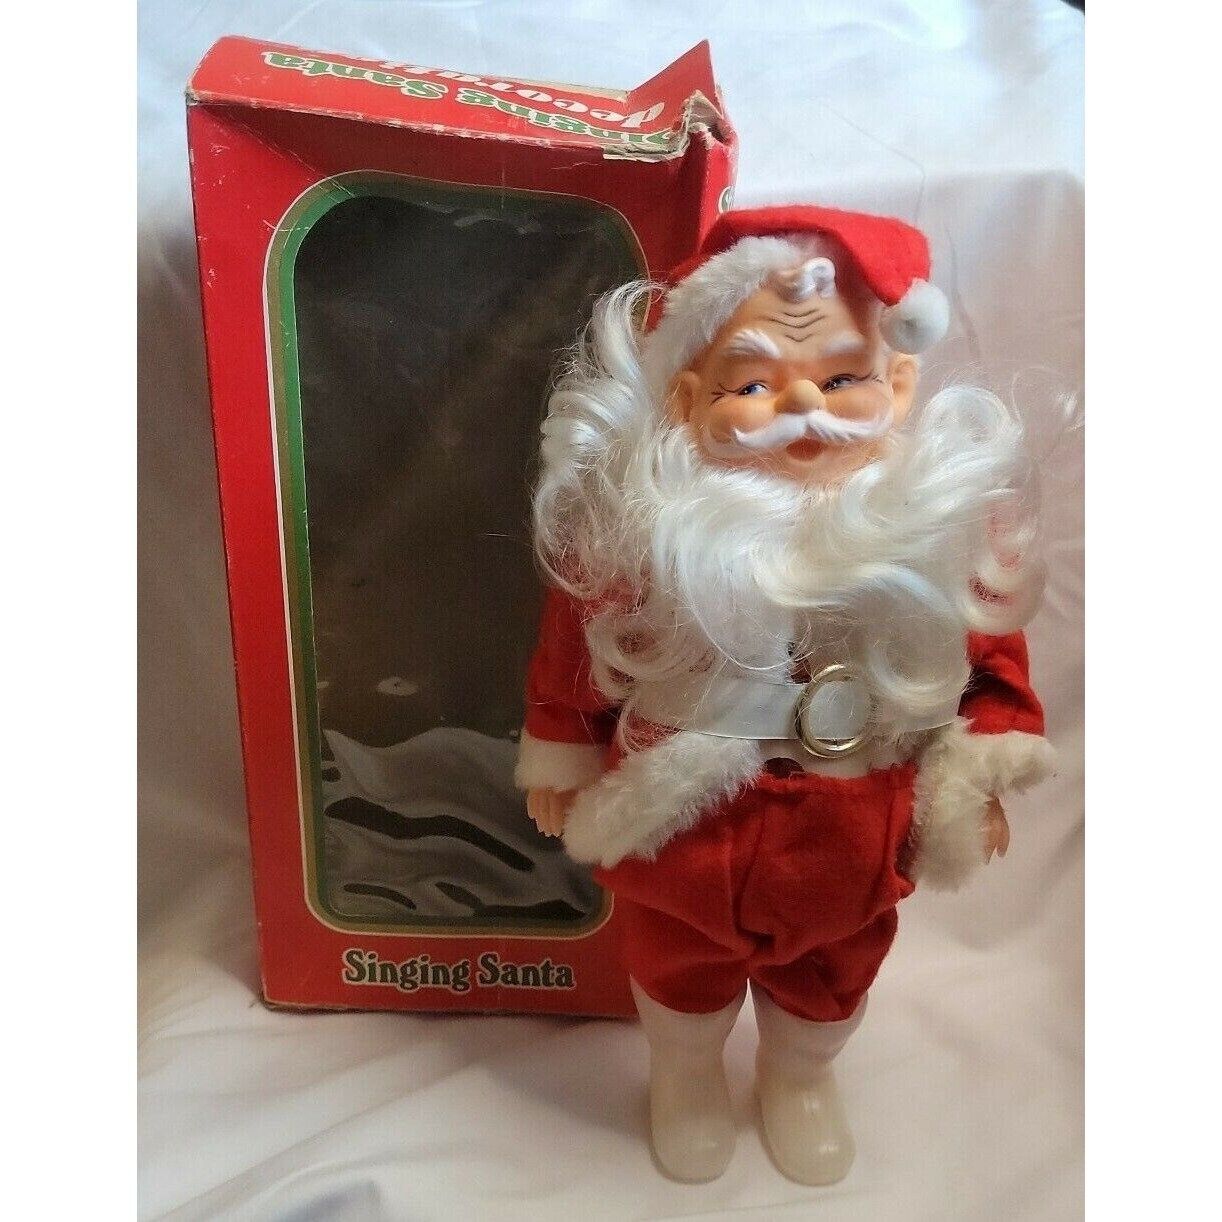 Singing Santa Decoration Commodore 1004c 1970s Early Animated Musical Christmas